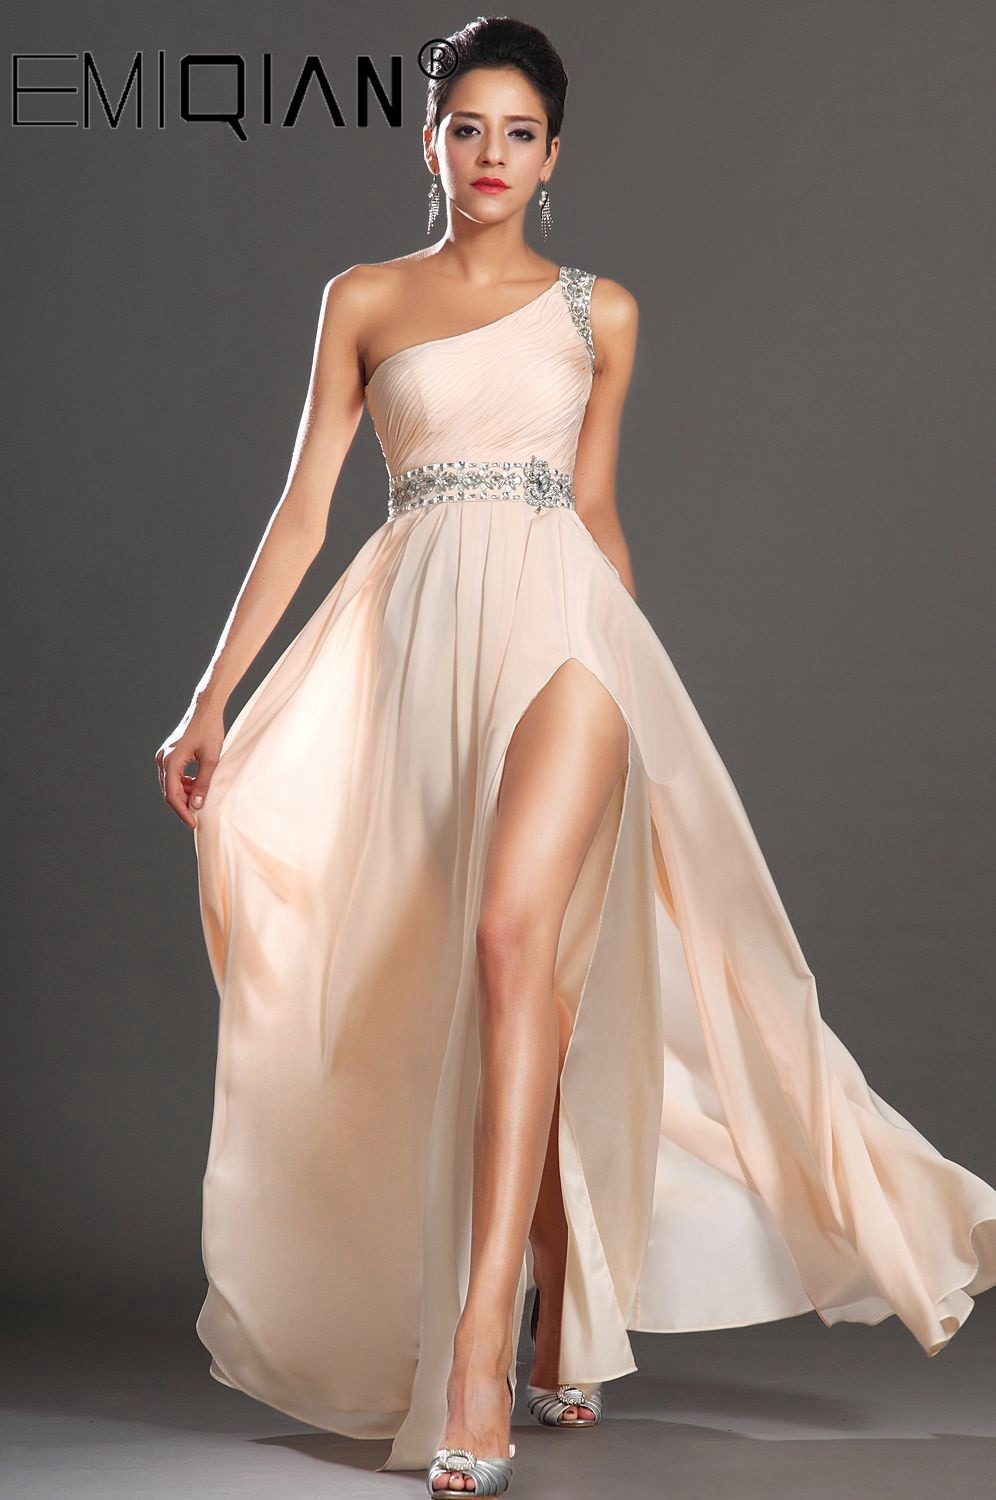 Choosing The Perfect One Shoulder Gown